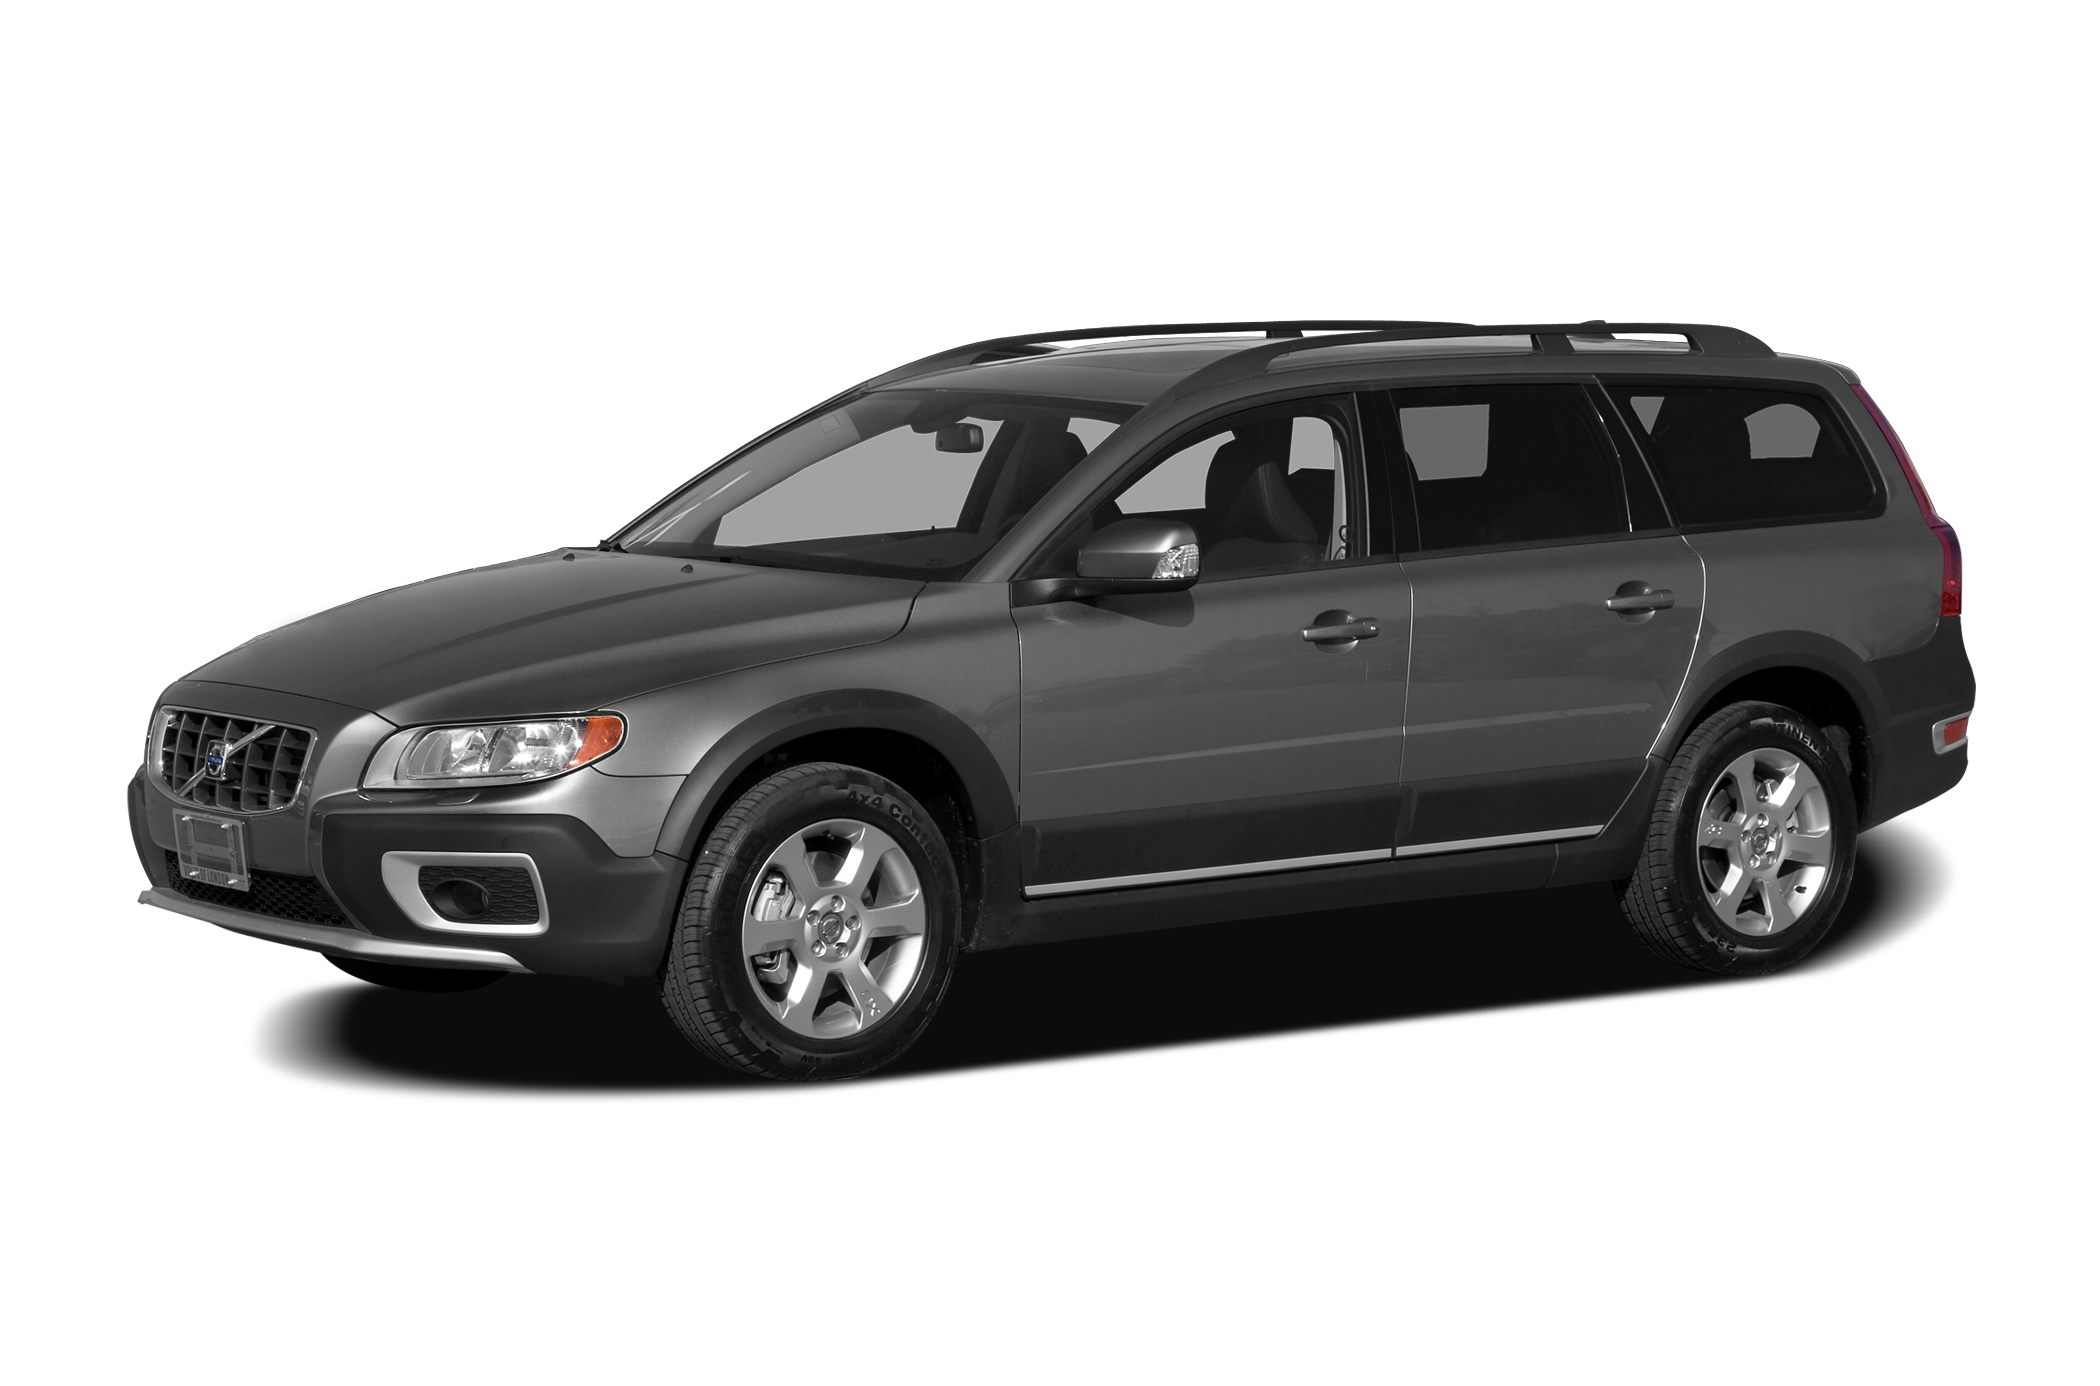 08 Volvo Xc70 3 2 4dr All Wheel Drive Station Wagon Specs And Prices